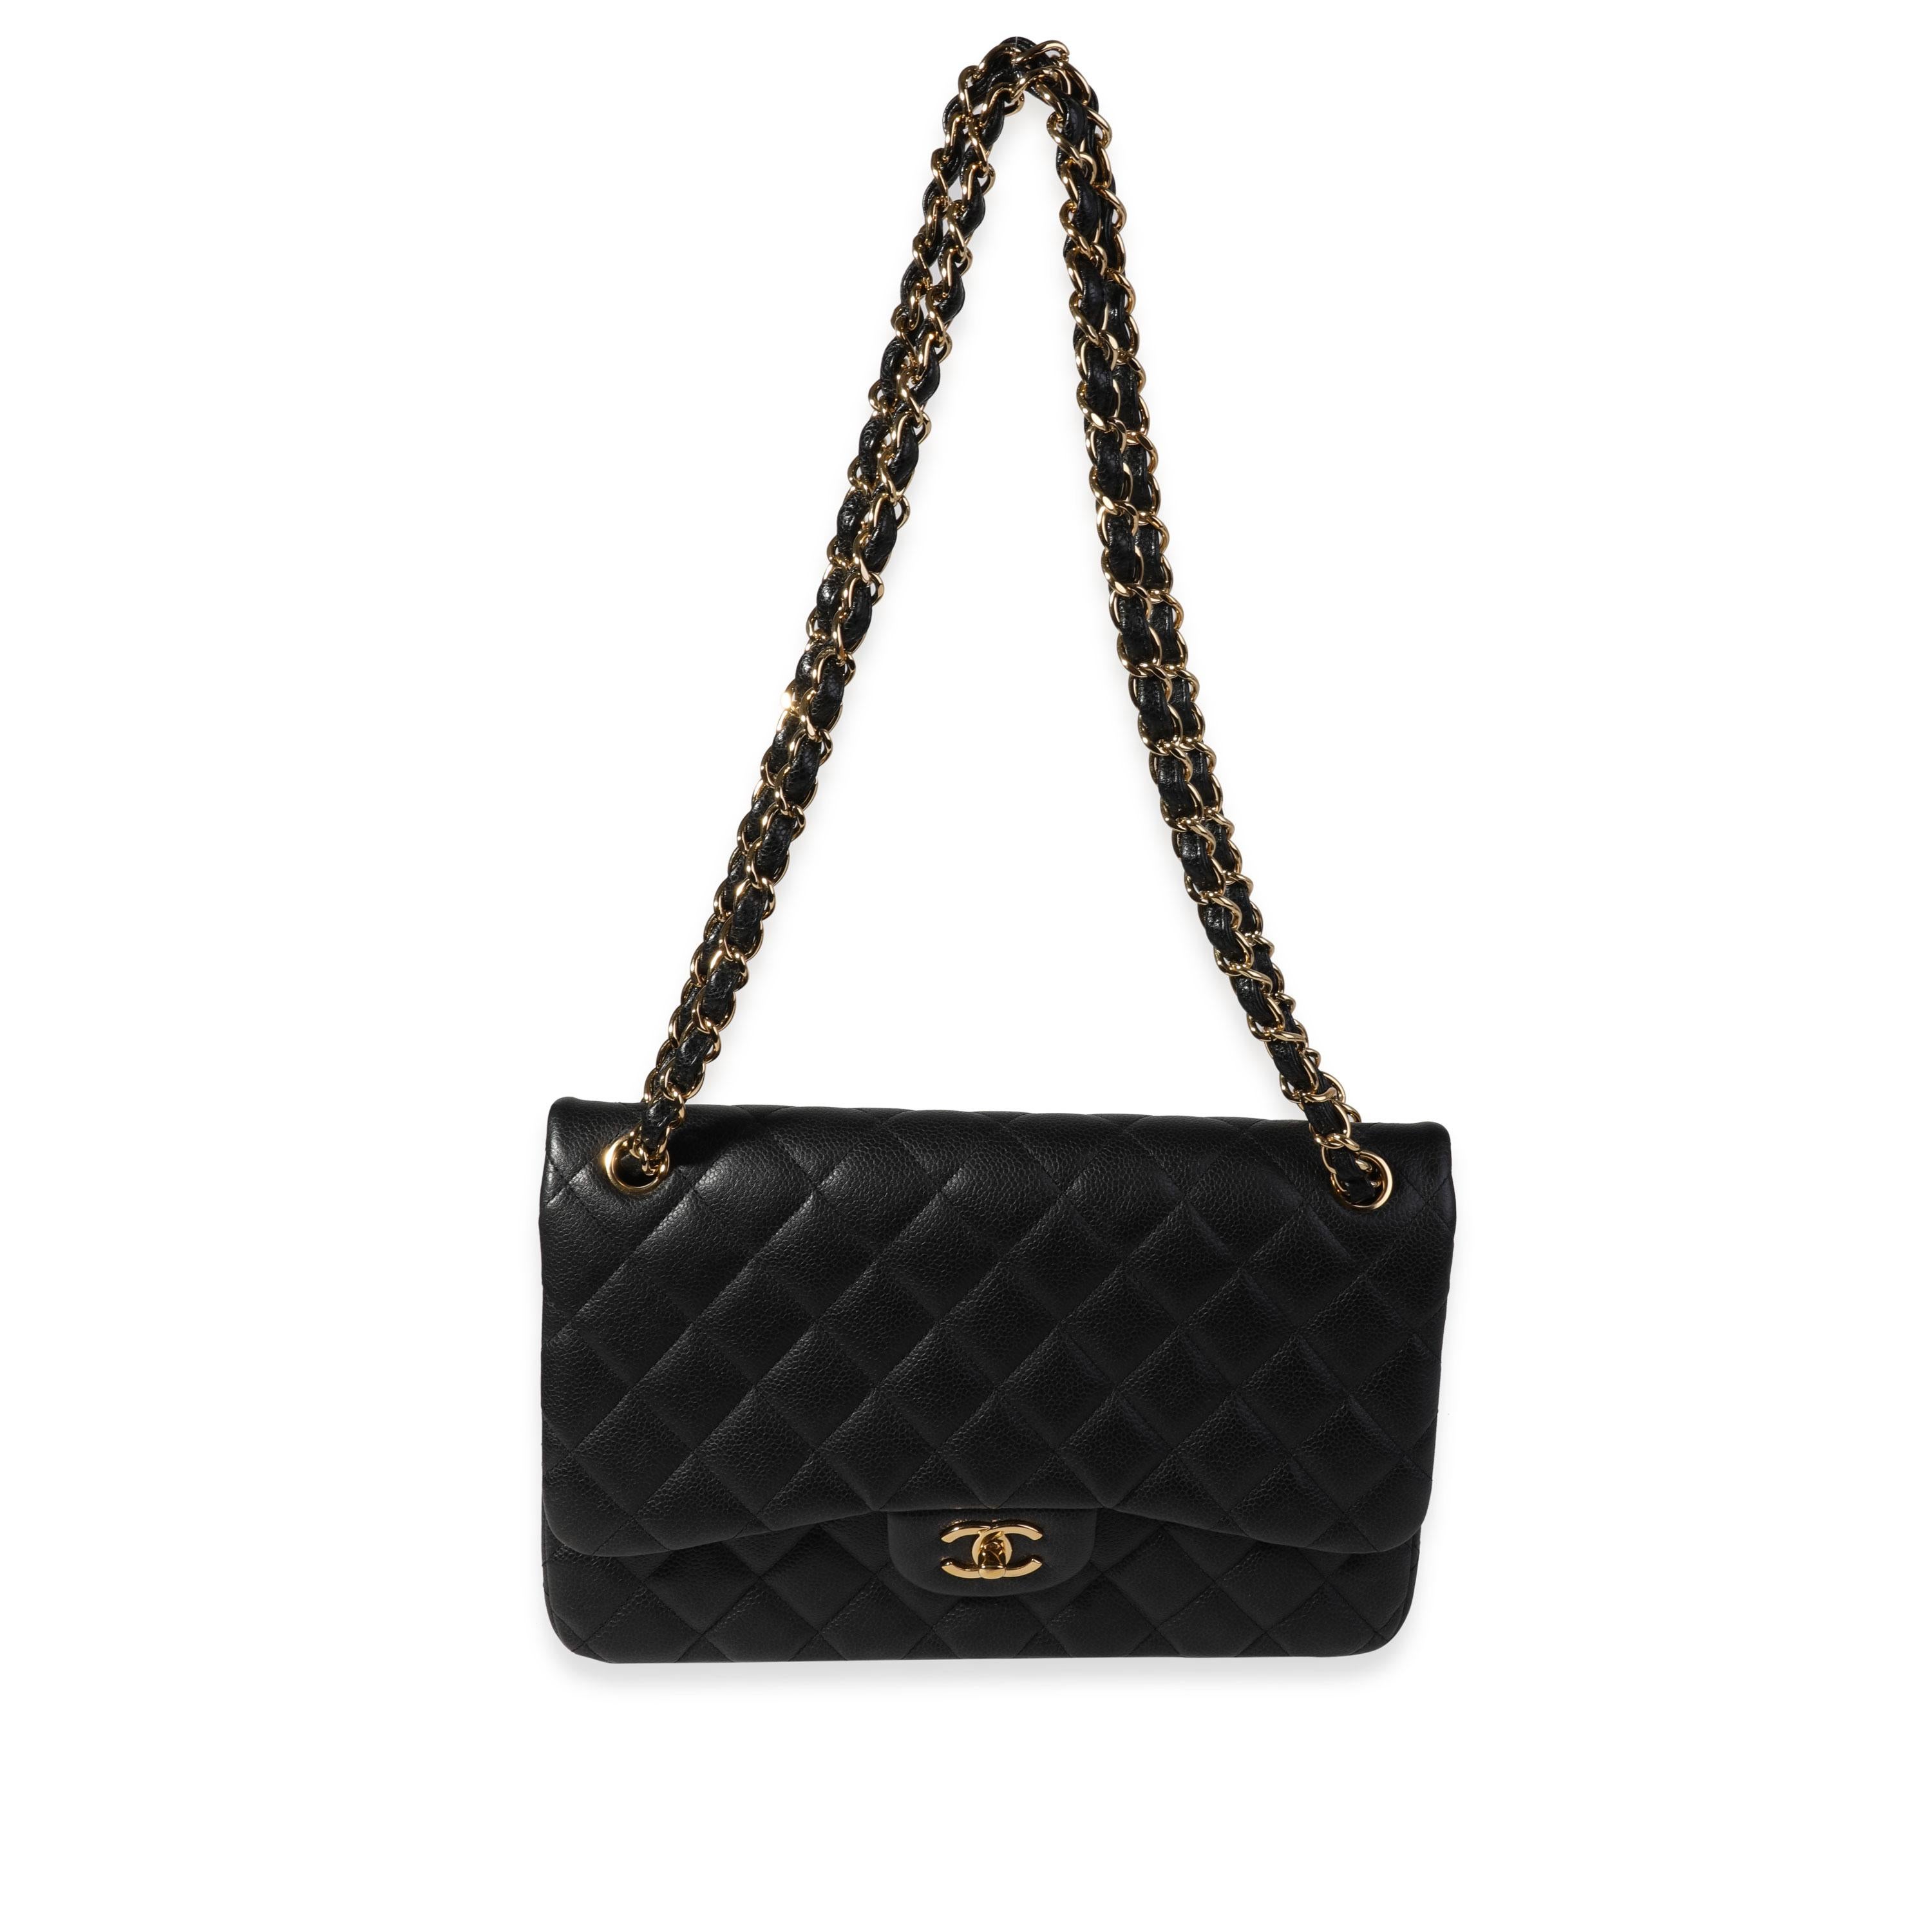 Listing Title: Chanel Black Quilted Caviar Jumbo Classic Double Flap Bag
SKU: 120153
MSRP: 9500.00

Handbag Condition: Very Good
Condition Comments: Wear to corners. Scratches on hardware.
Brand: Chanel
Model: Classic Double Flap
Origin Country: